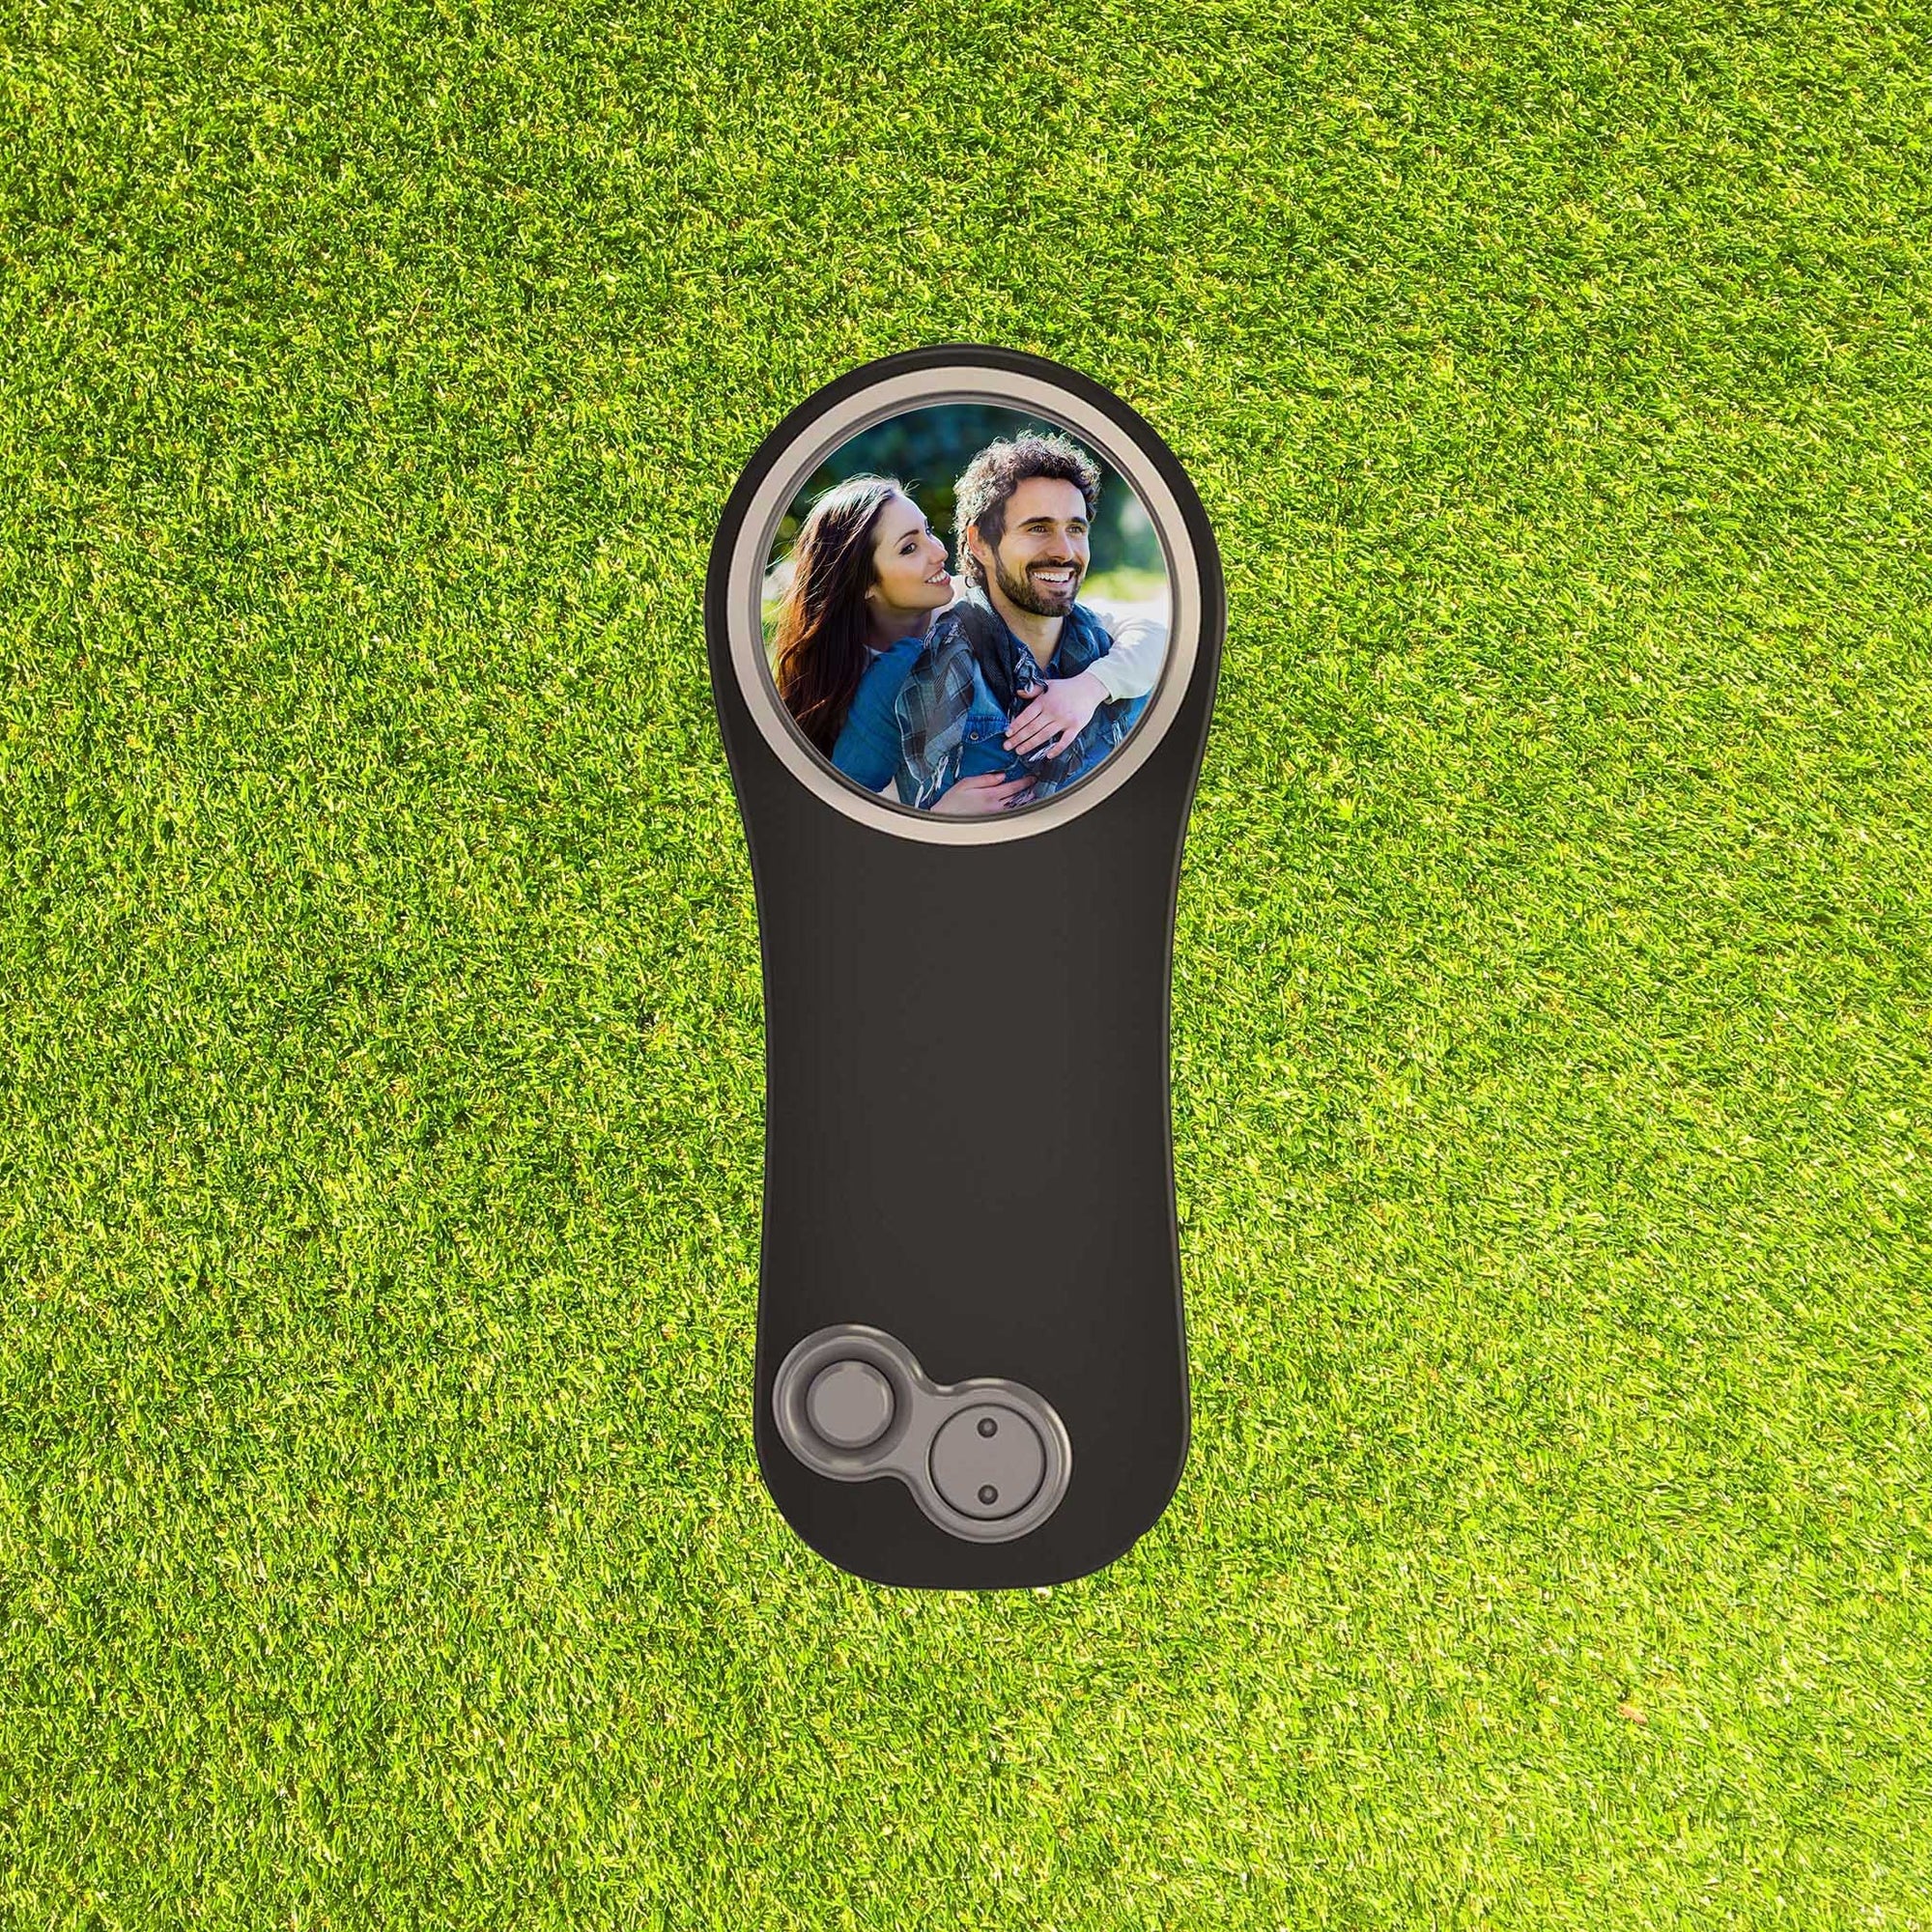 Personalized PitchFix Divot Tool | Golf Accessories | Golf Gifts | Custom Photo Family